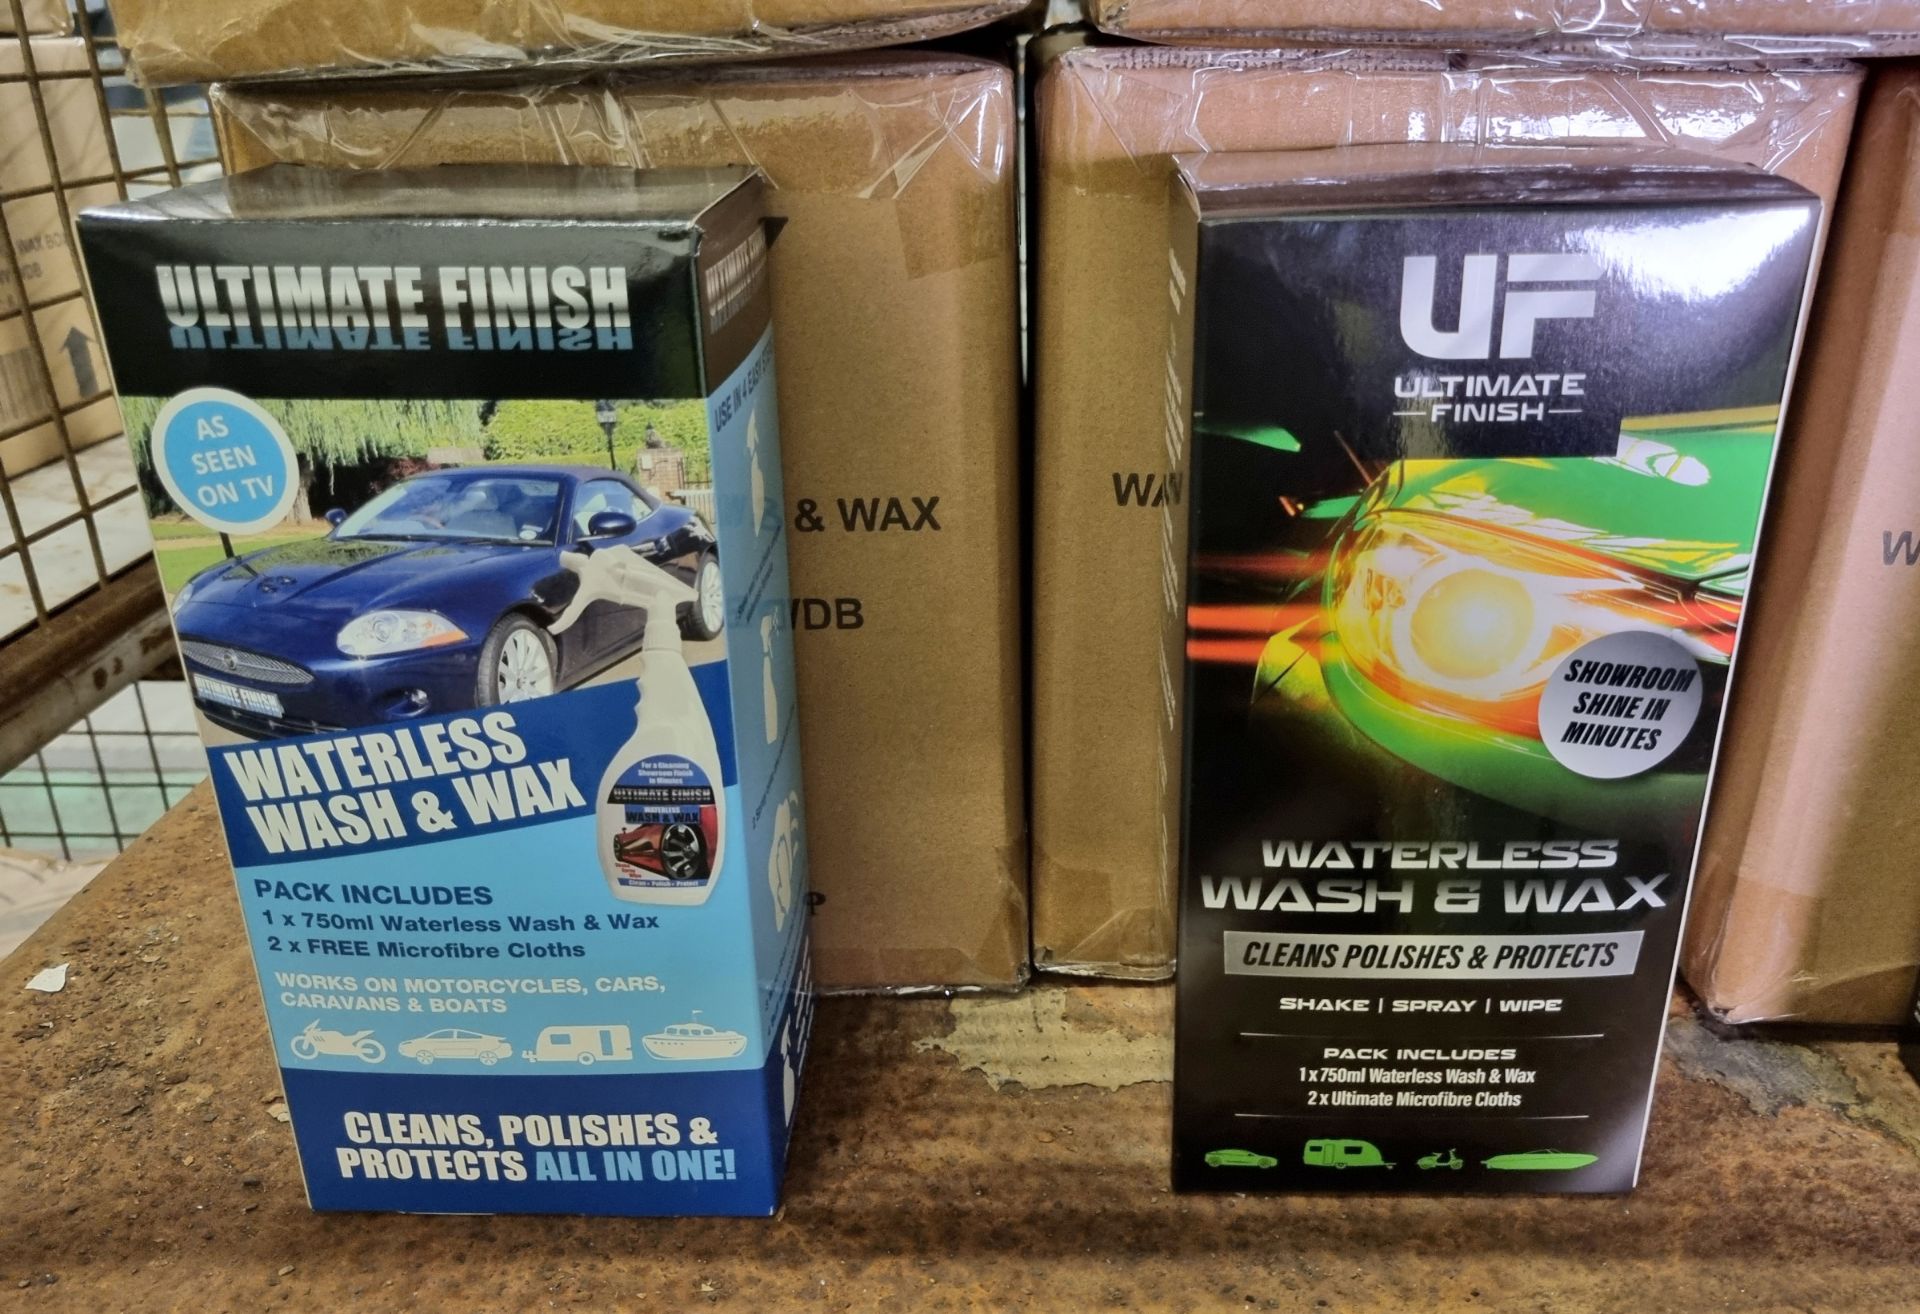 100x Ultimate Finish waterless wash & wax kits (750ml bottle and 2x microfibre cloths per pack) - Image 4 of 8